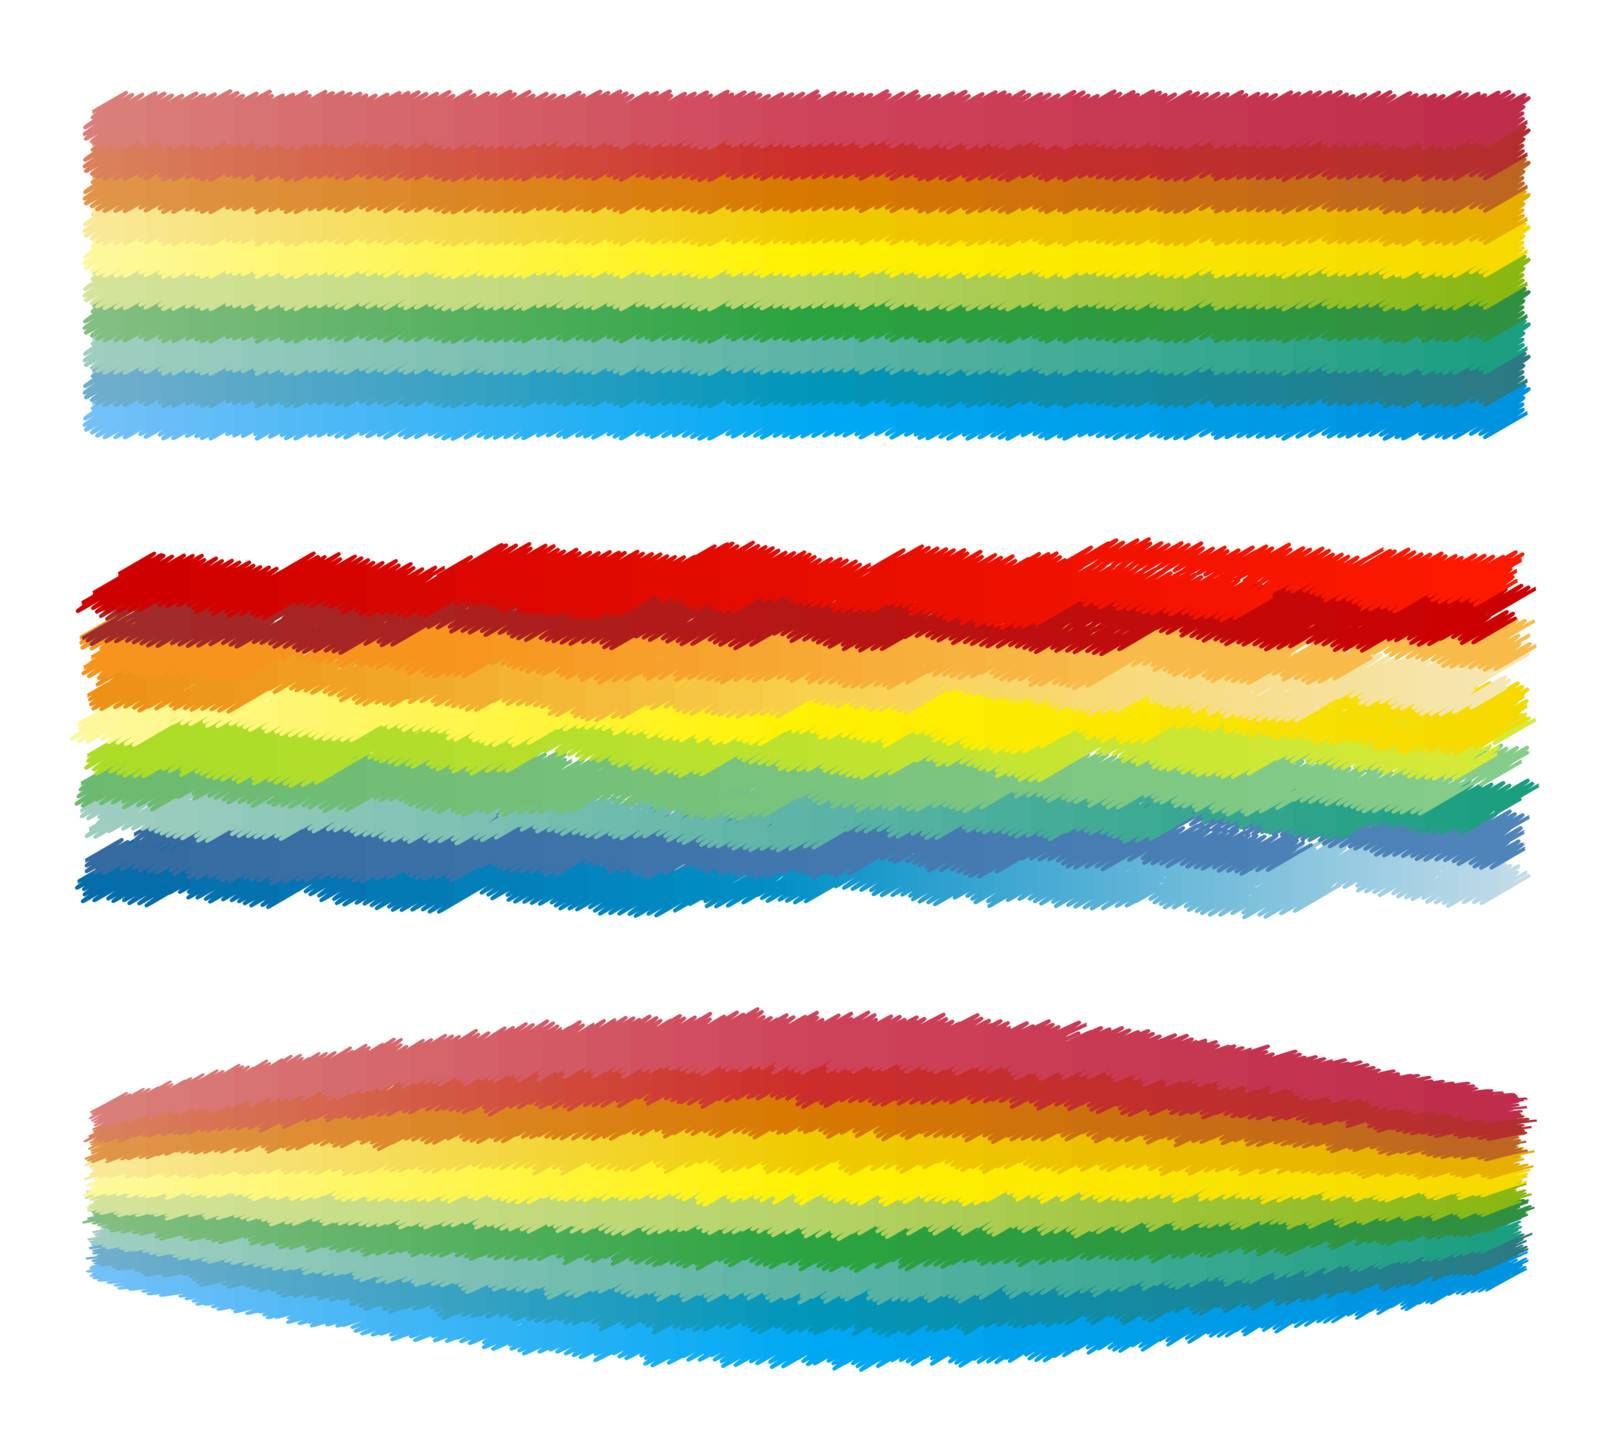 Vector illustration of highly detailed effects of scribbled crayon rainbow colored stripes.